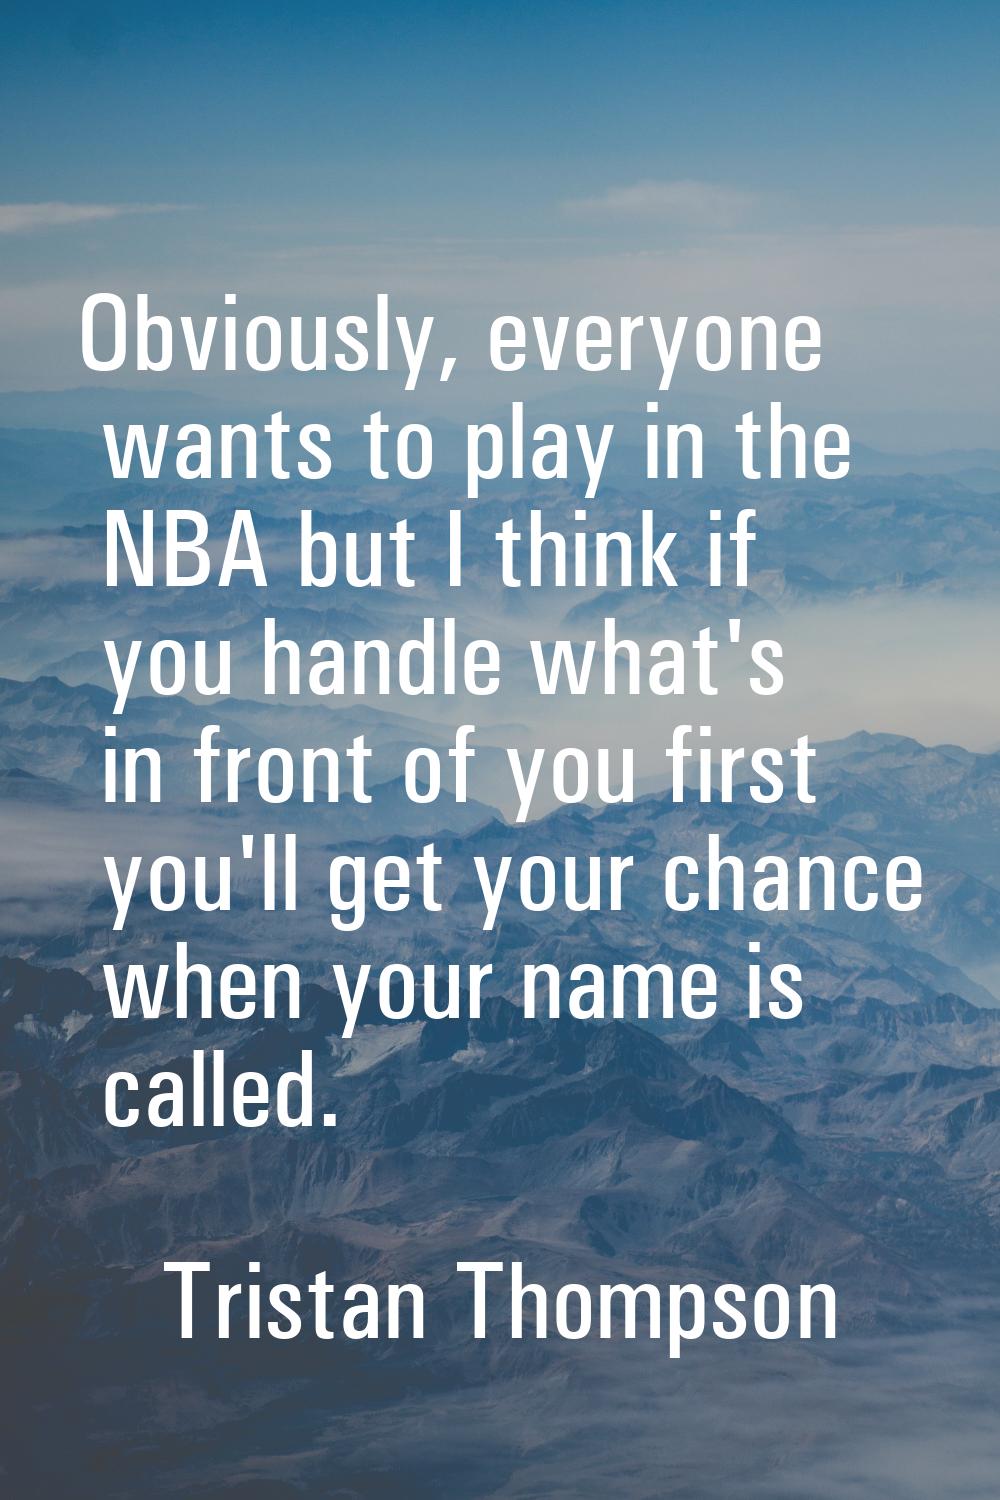 Obviously, everyone wants to play in the NBA but I think if you handle what's in front of you first